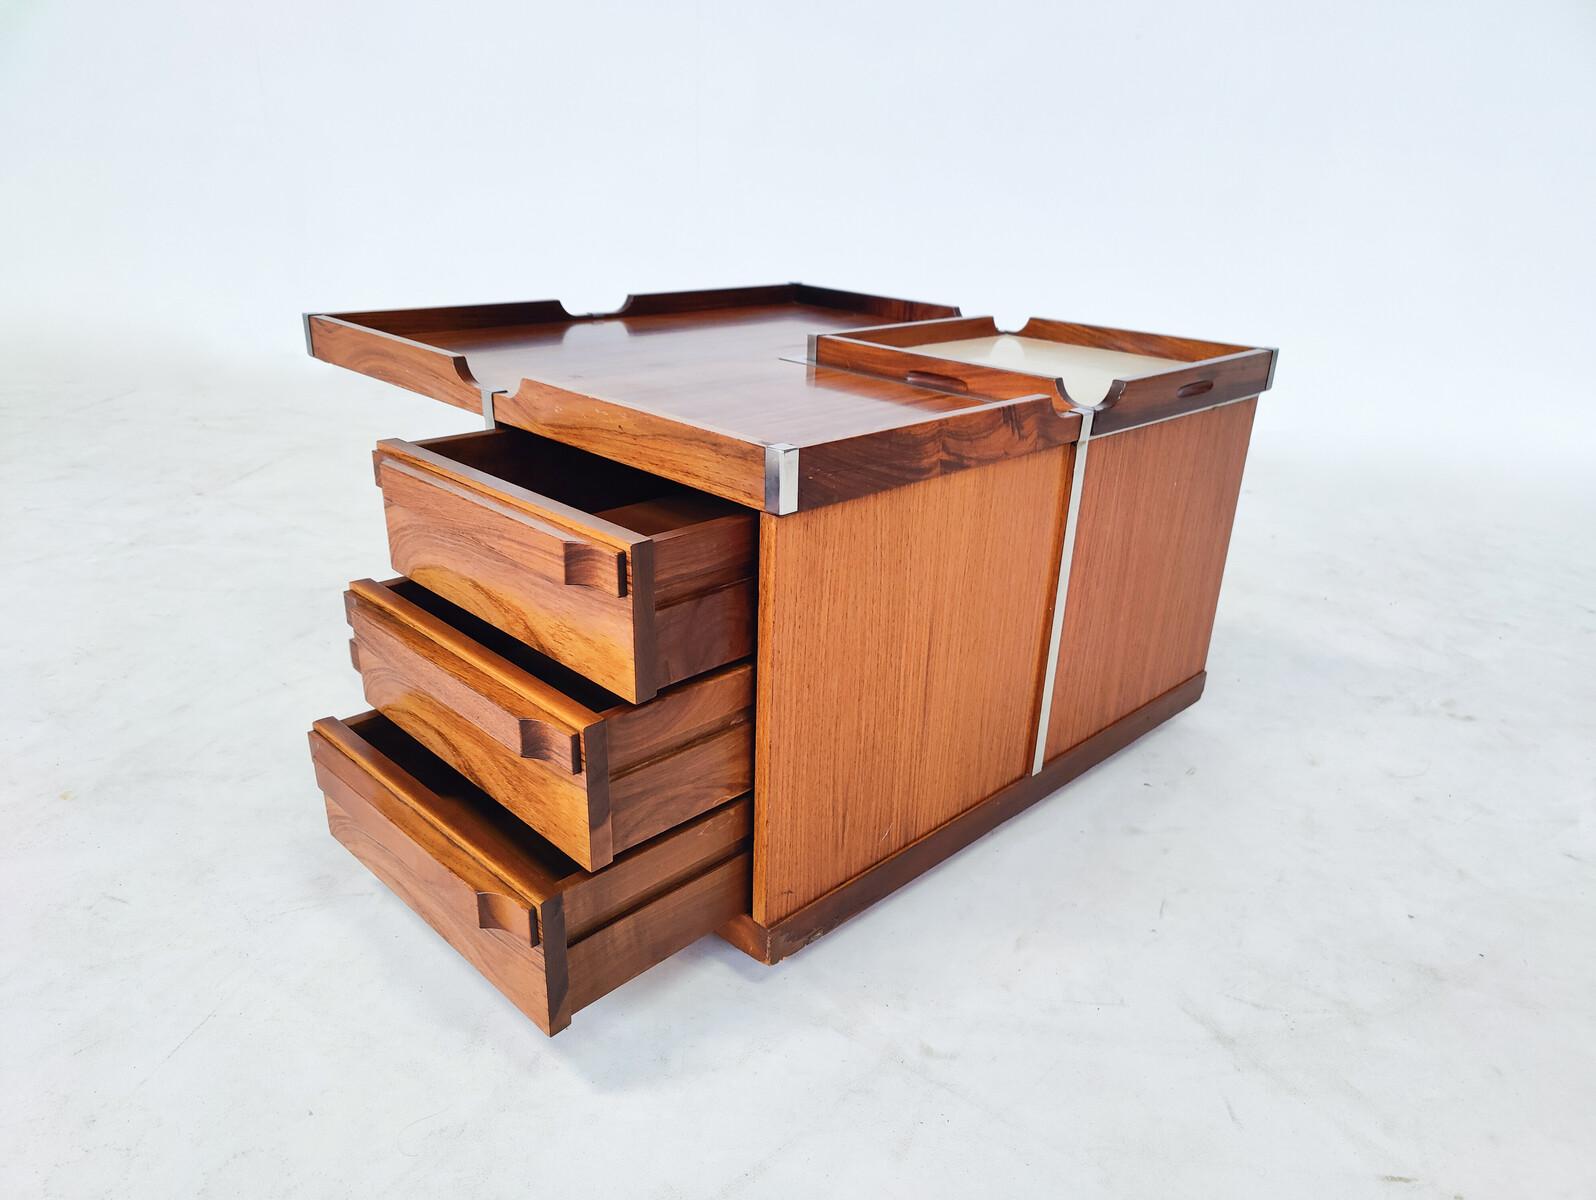 Mid-Century Modern Italian Modular Coffee Table with Built-in Storage by Fiarm, 1960s.